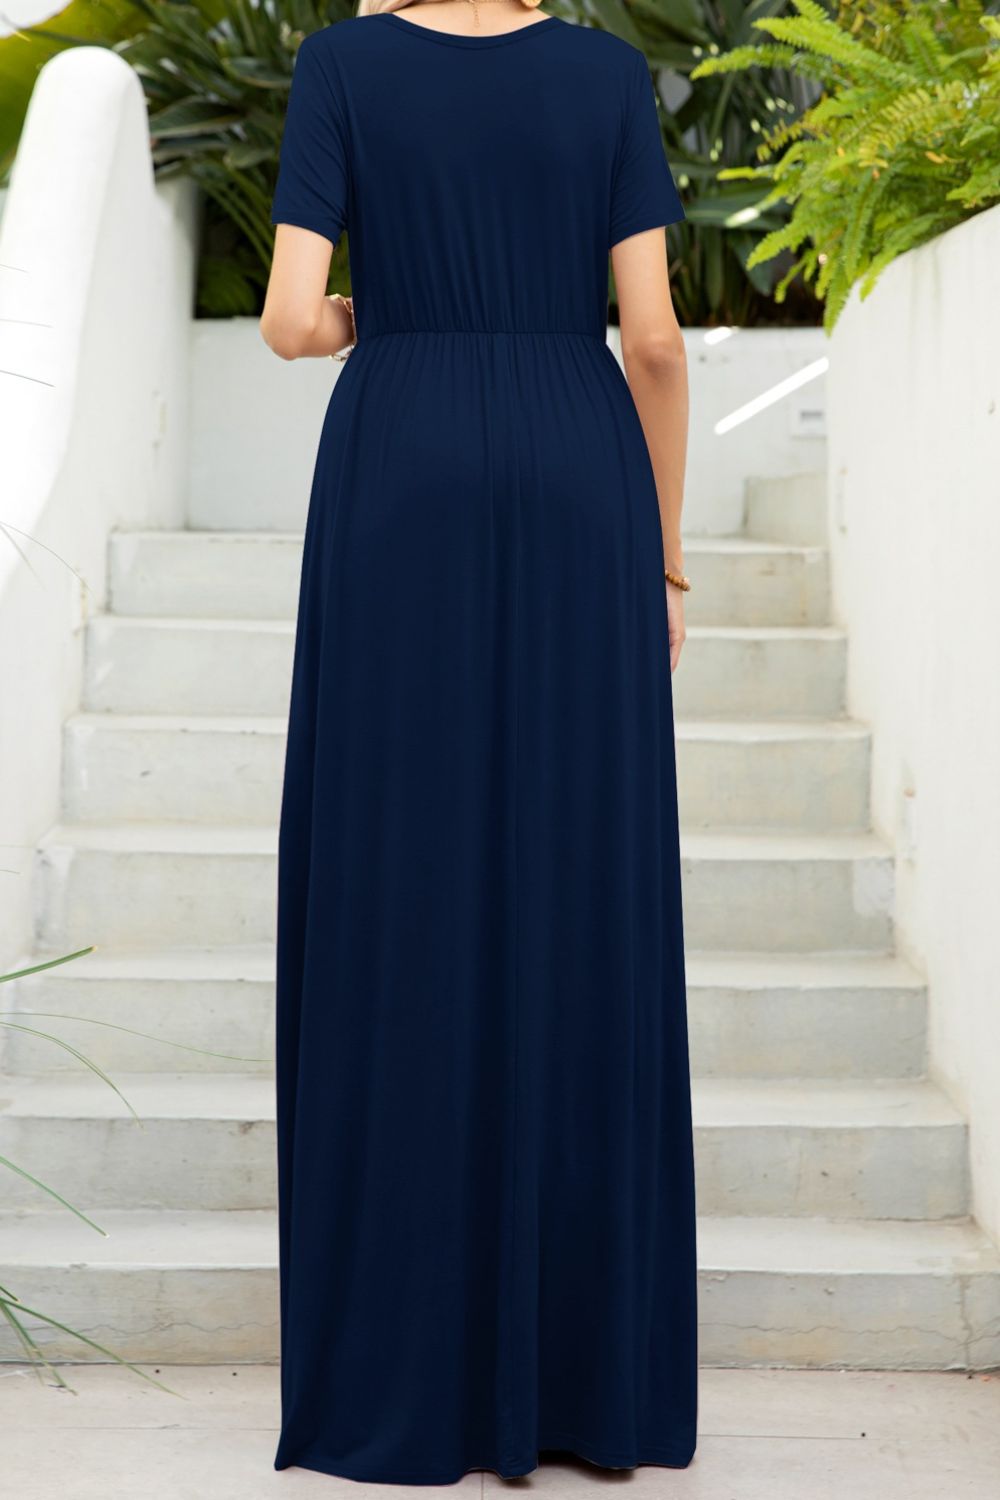 Elegance Round Neck Maxi Tee Dress with Pockets in Forest, Navy, Wine and Black